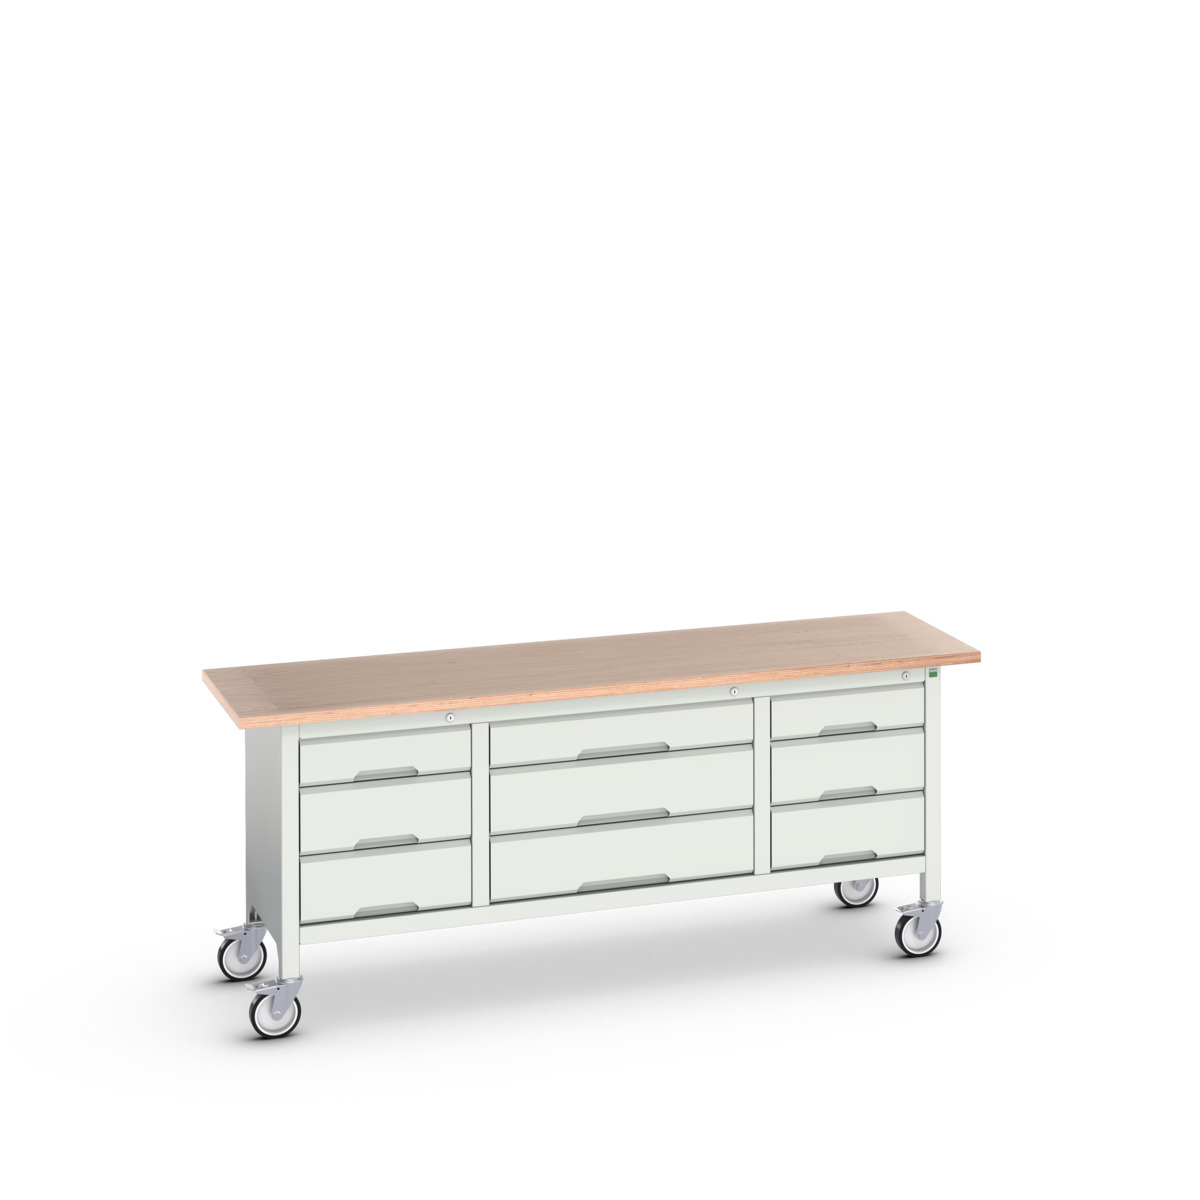 16923233.16 - verso mobile storage bench (mpx)